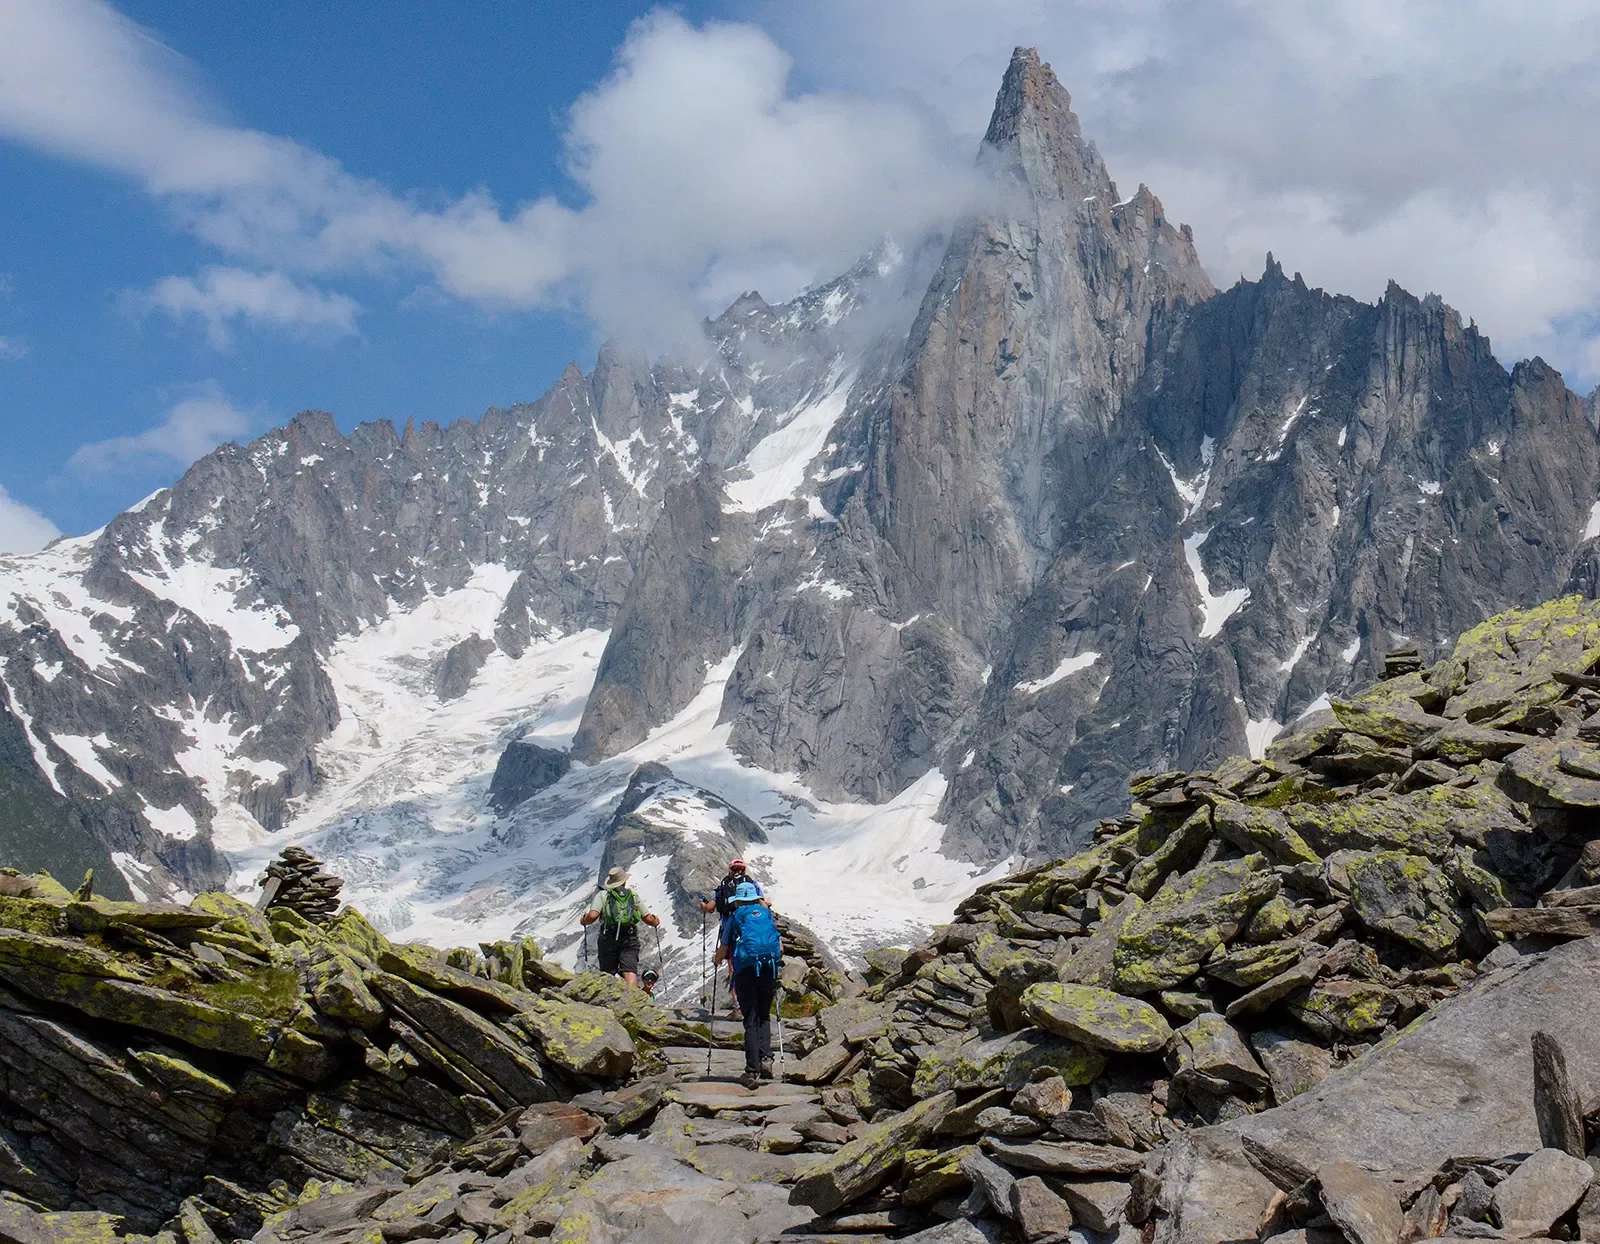 Two guests walking in craggy mountain pathway, large range in distance.